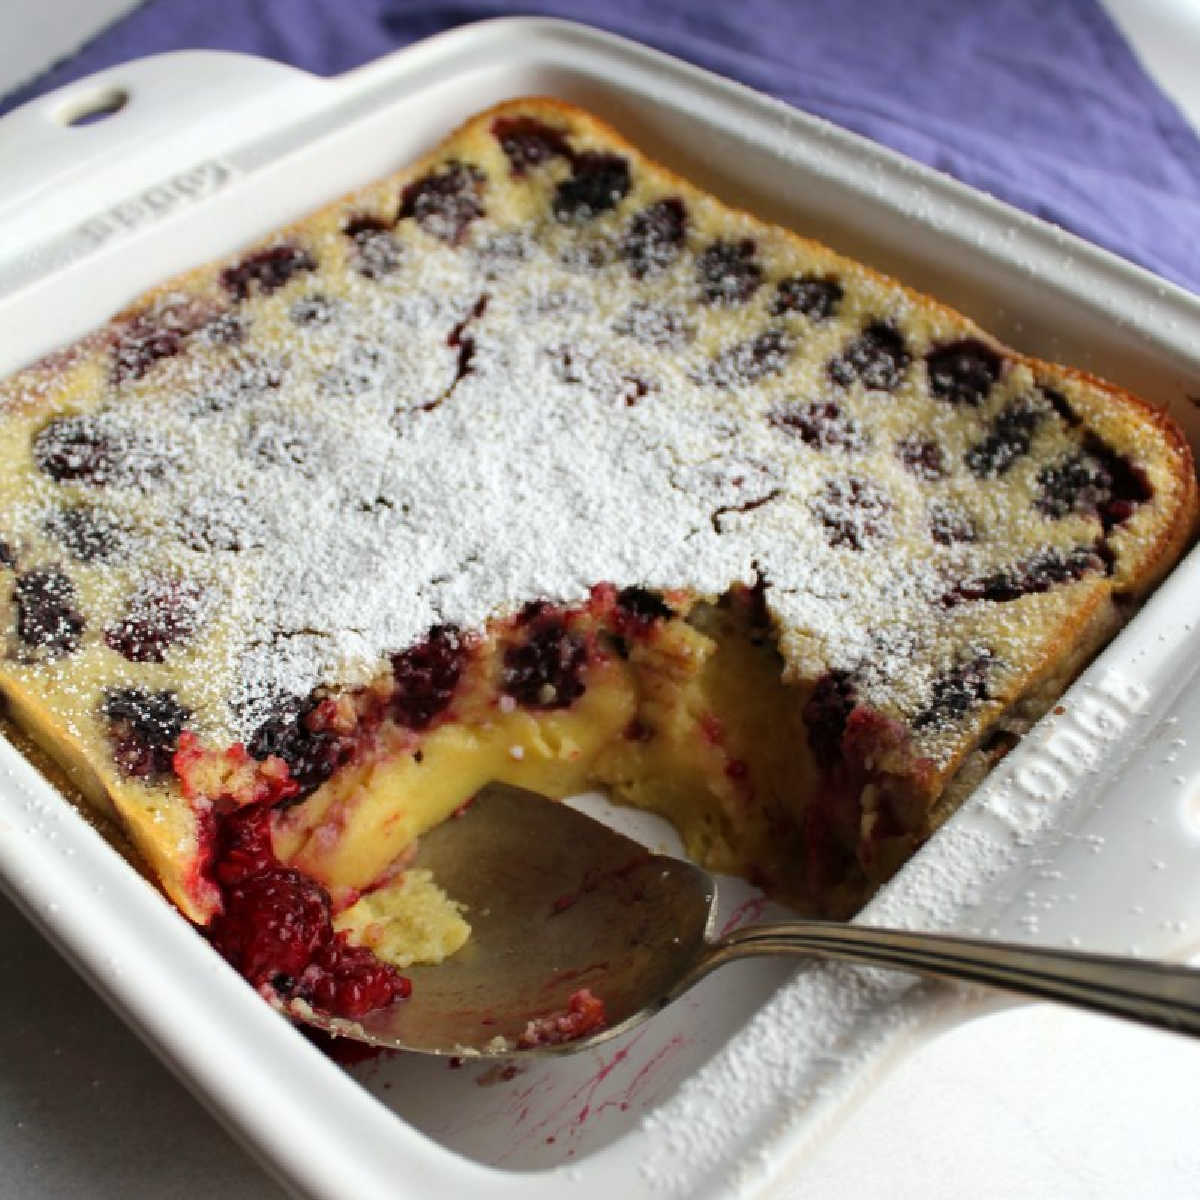 square pan on blackberry clafoutis with berry spoon in corner and golden custardy inside showing.